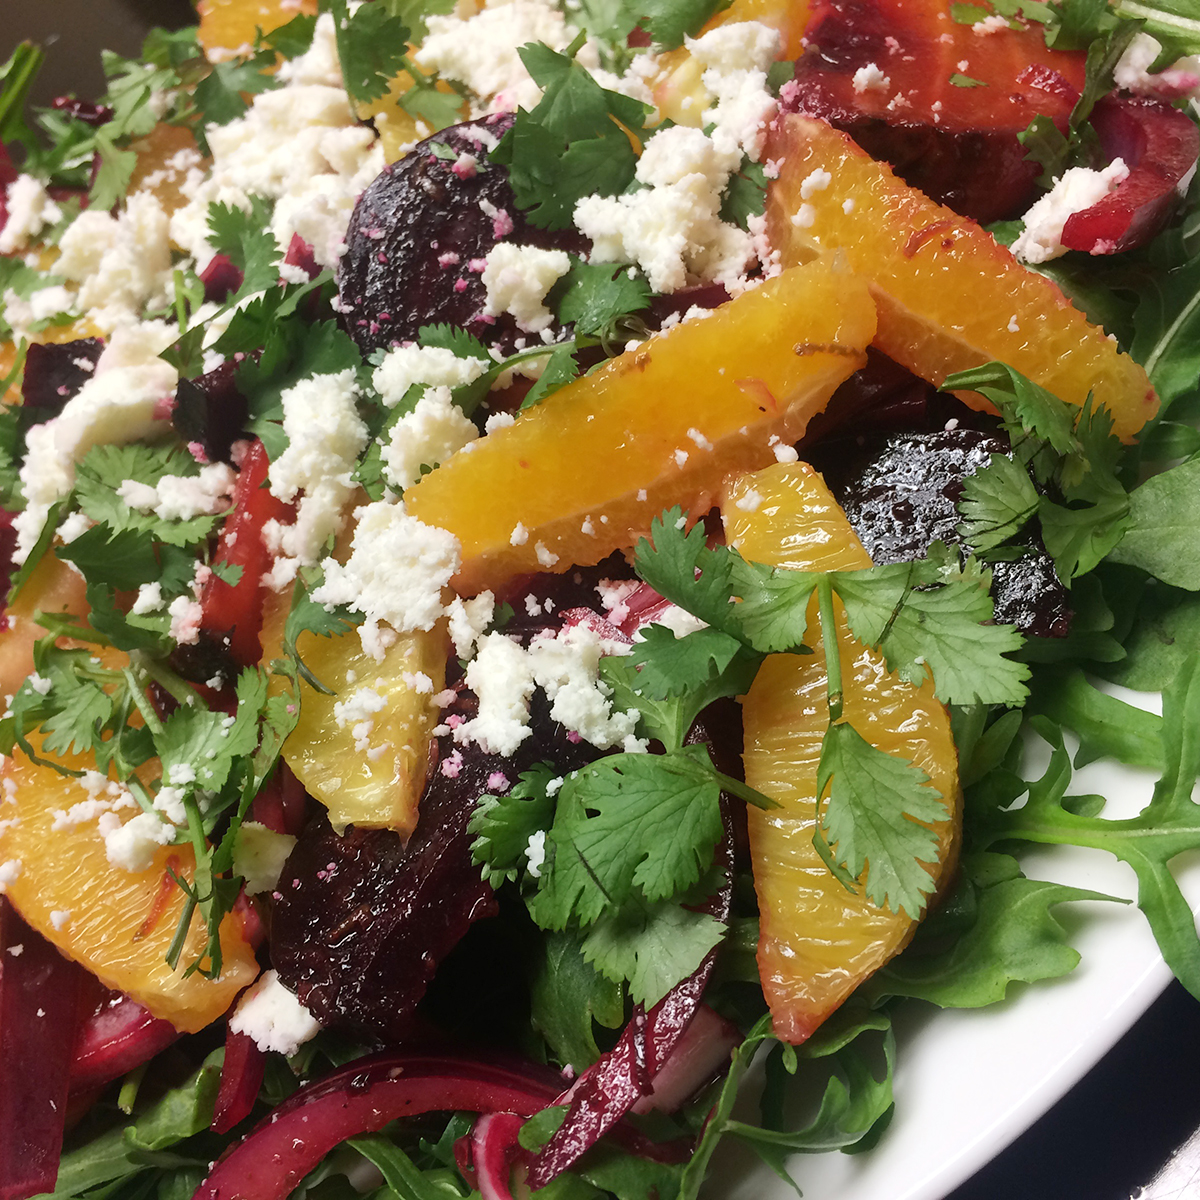 Roasted Beet Salad with Oranges and Queso Fresco